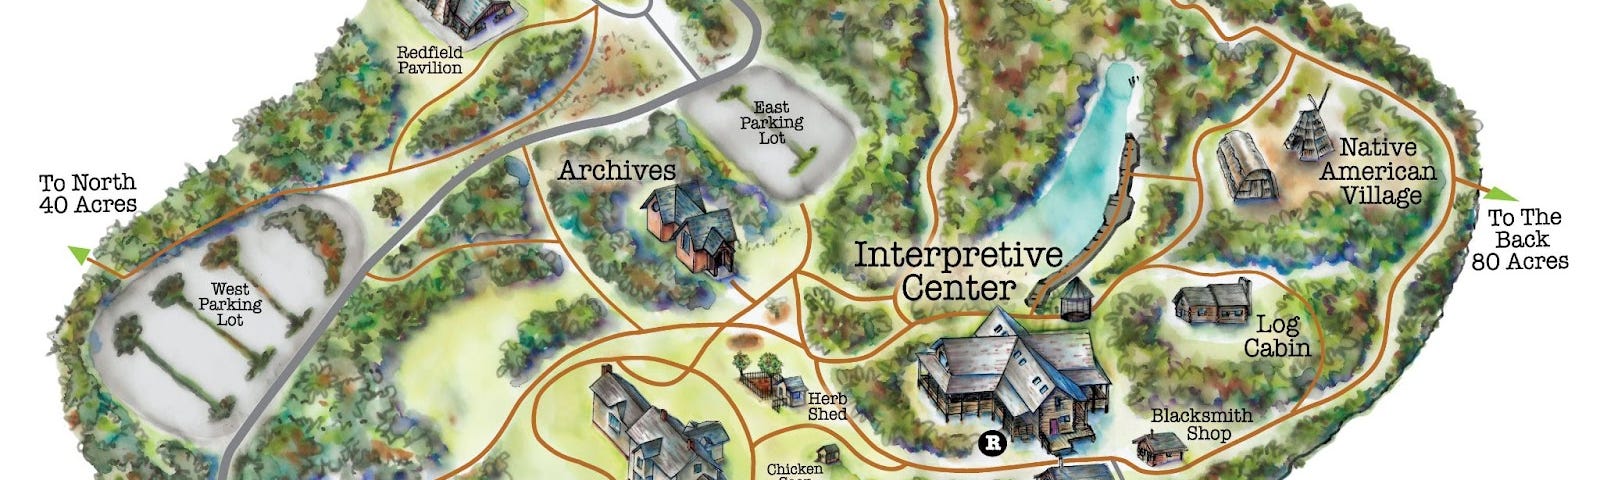 Custom map of The Grove, National Historic Landmark, in Glenview, IL. All the buildings have been hand-drawn in 3-D, walking paths are seen through the trees, gardens, a graveyard, and a Native American teepee are all included on the map which gives a sense of place. Created by Lynda Wallis, Freelance Illustrations.